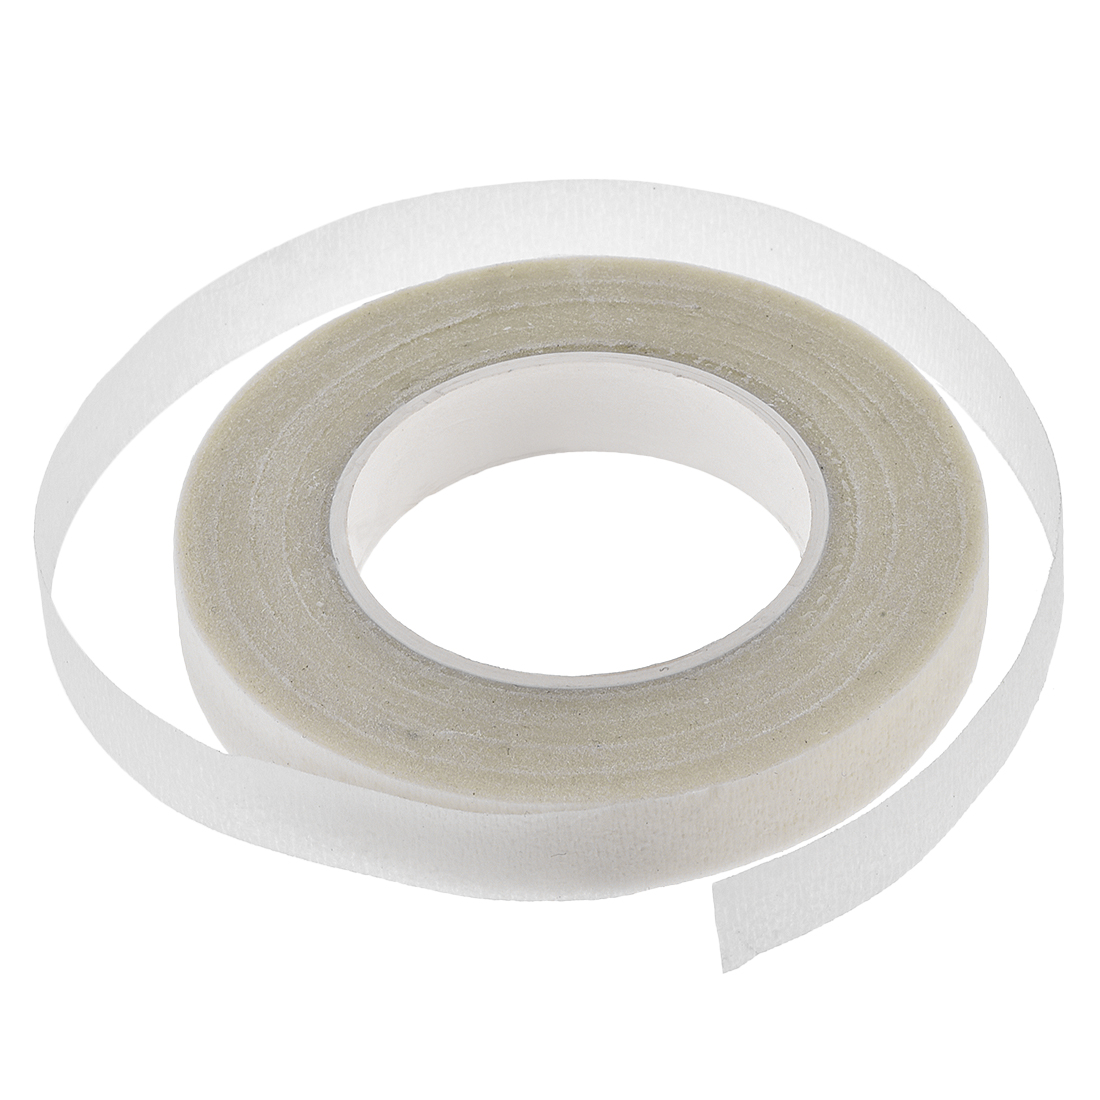 Uxcell 1/2 inch Width 30 yard Floral Adhesive Tape White 4 Pack